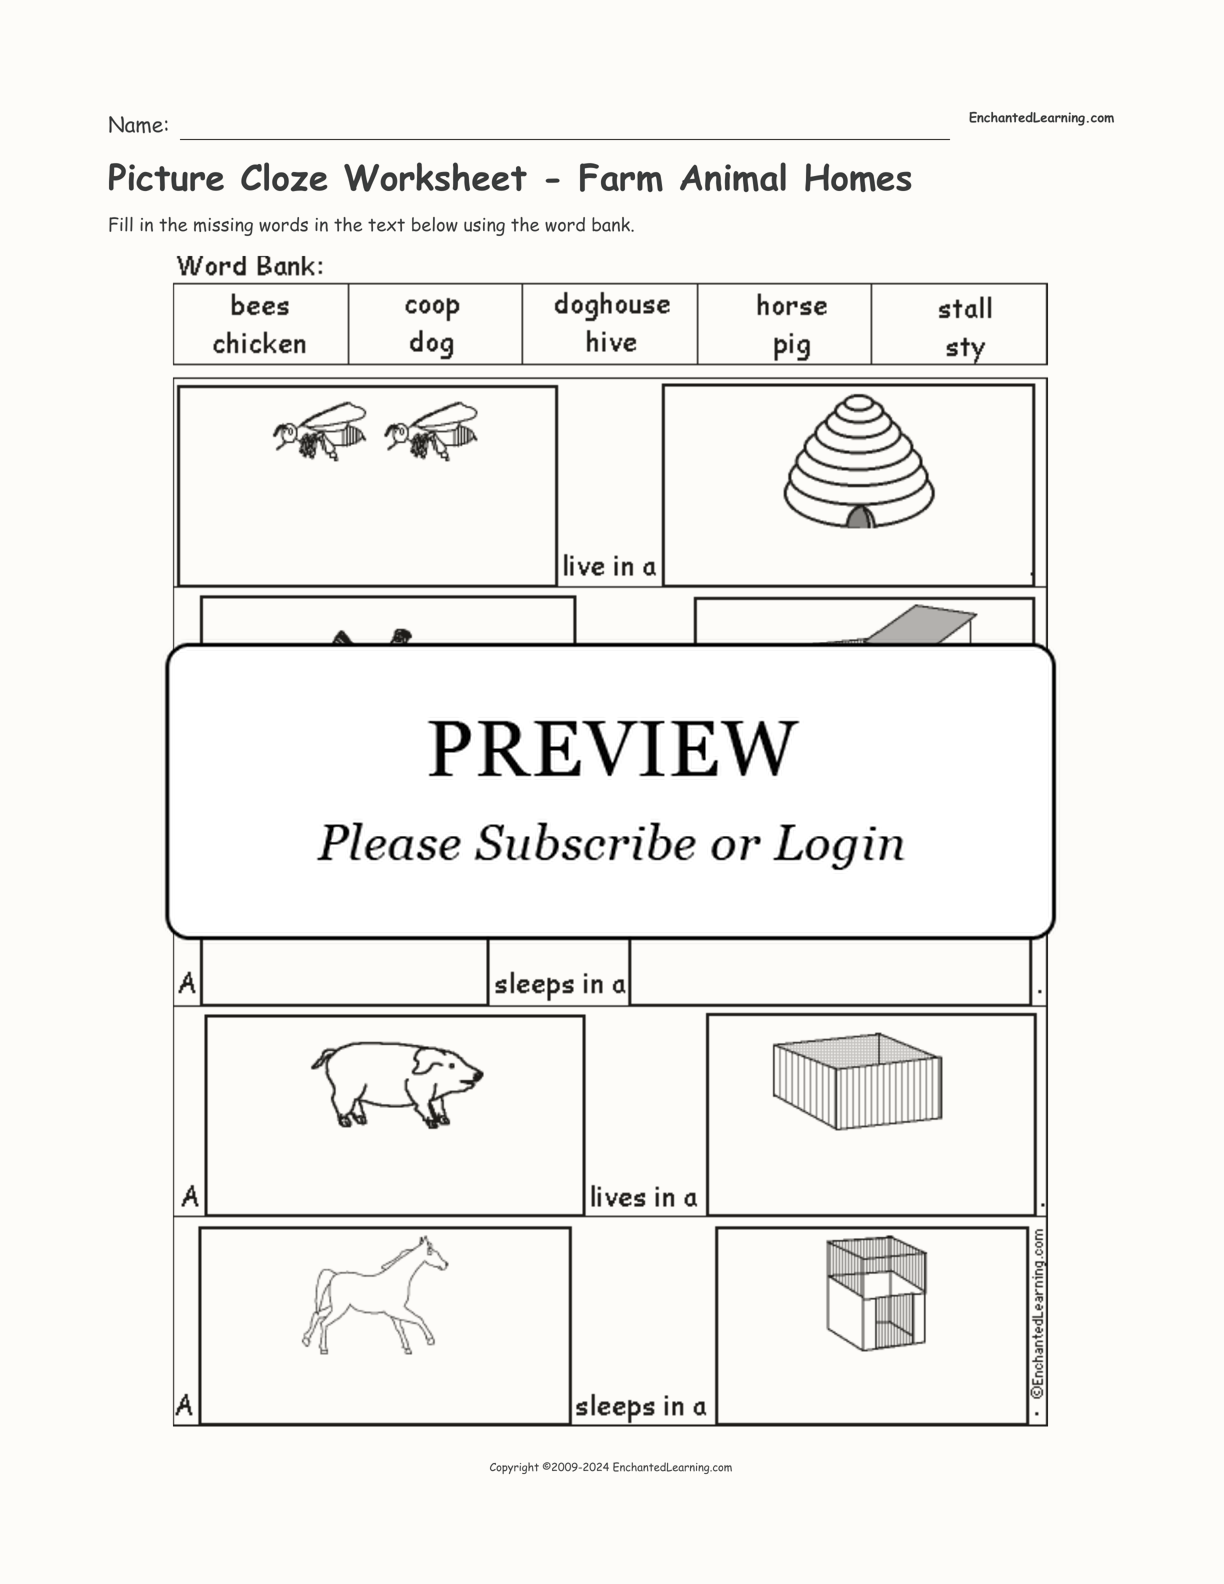 Picture Cloze Worksheet - Farm Animal Homes interactive worksheet page 1